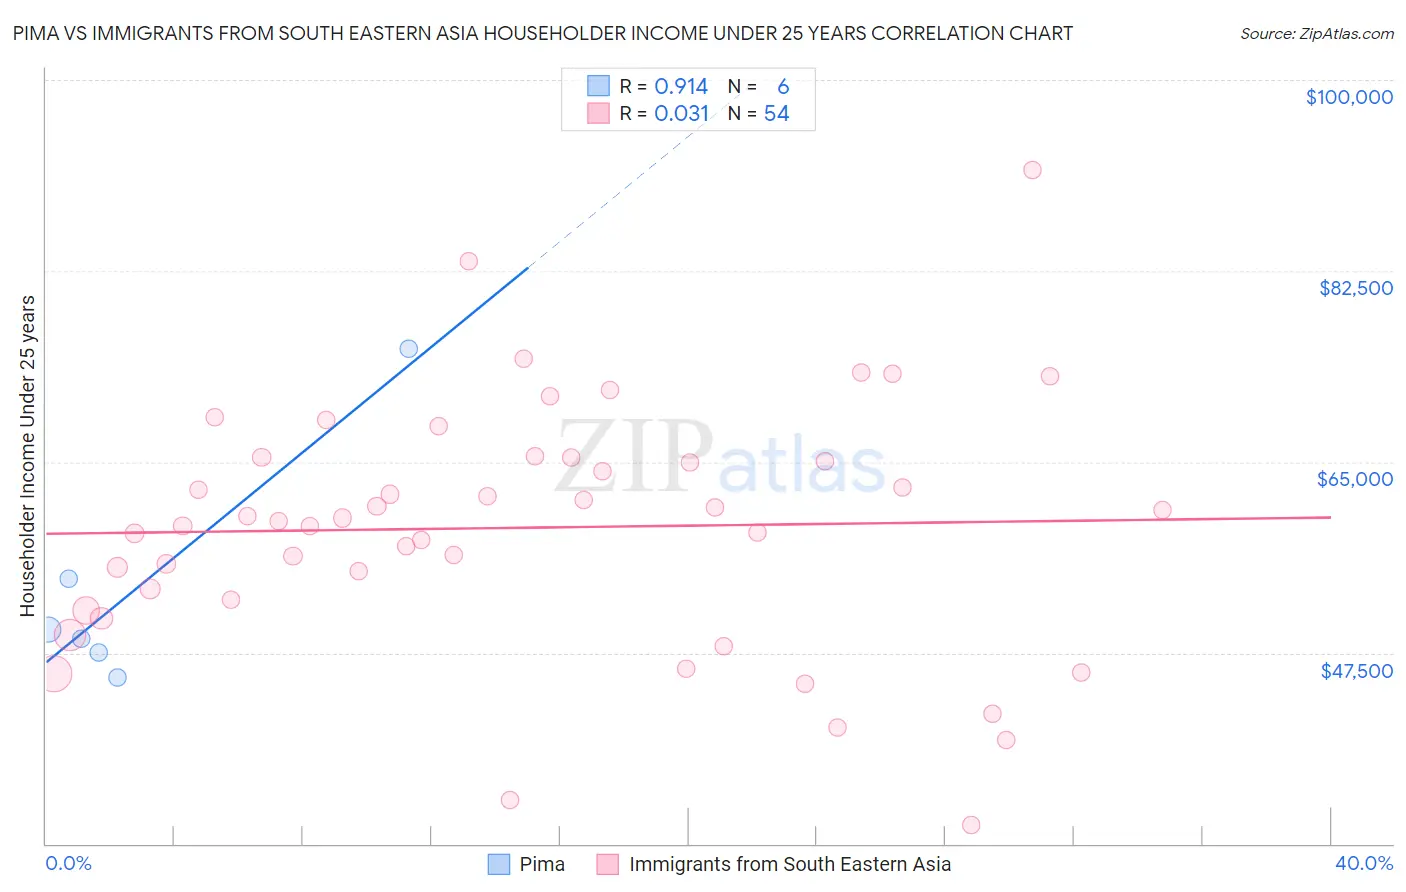 Pima vs Immigrants from South Eastern Asia Householder Income Under 25 years